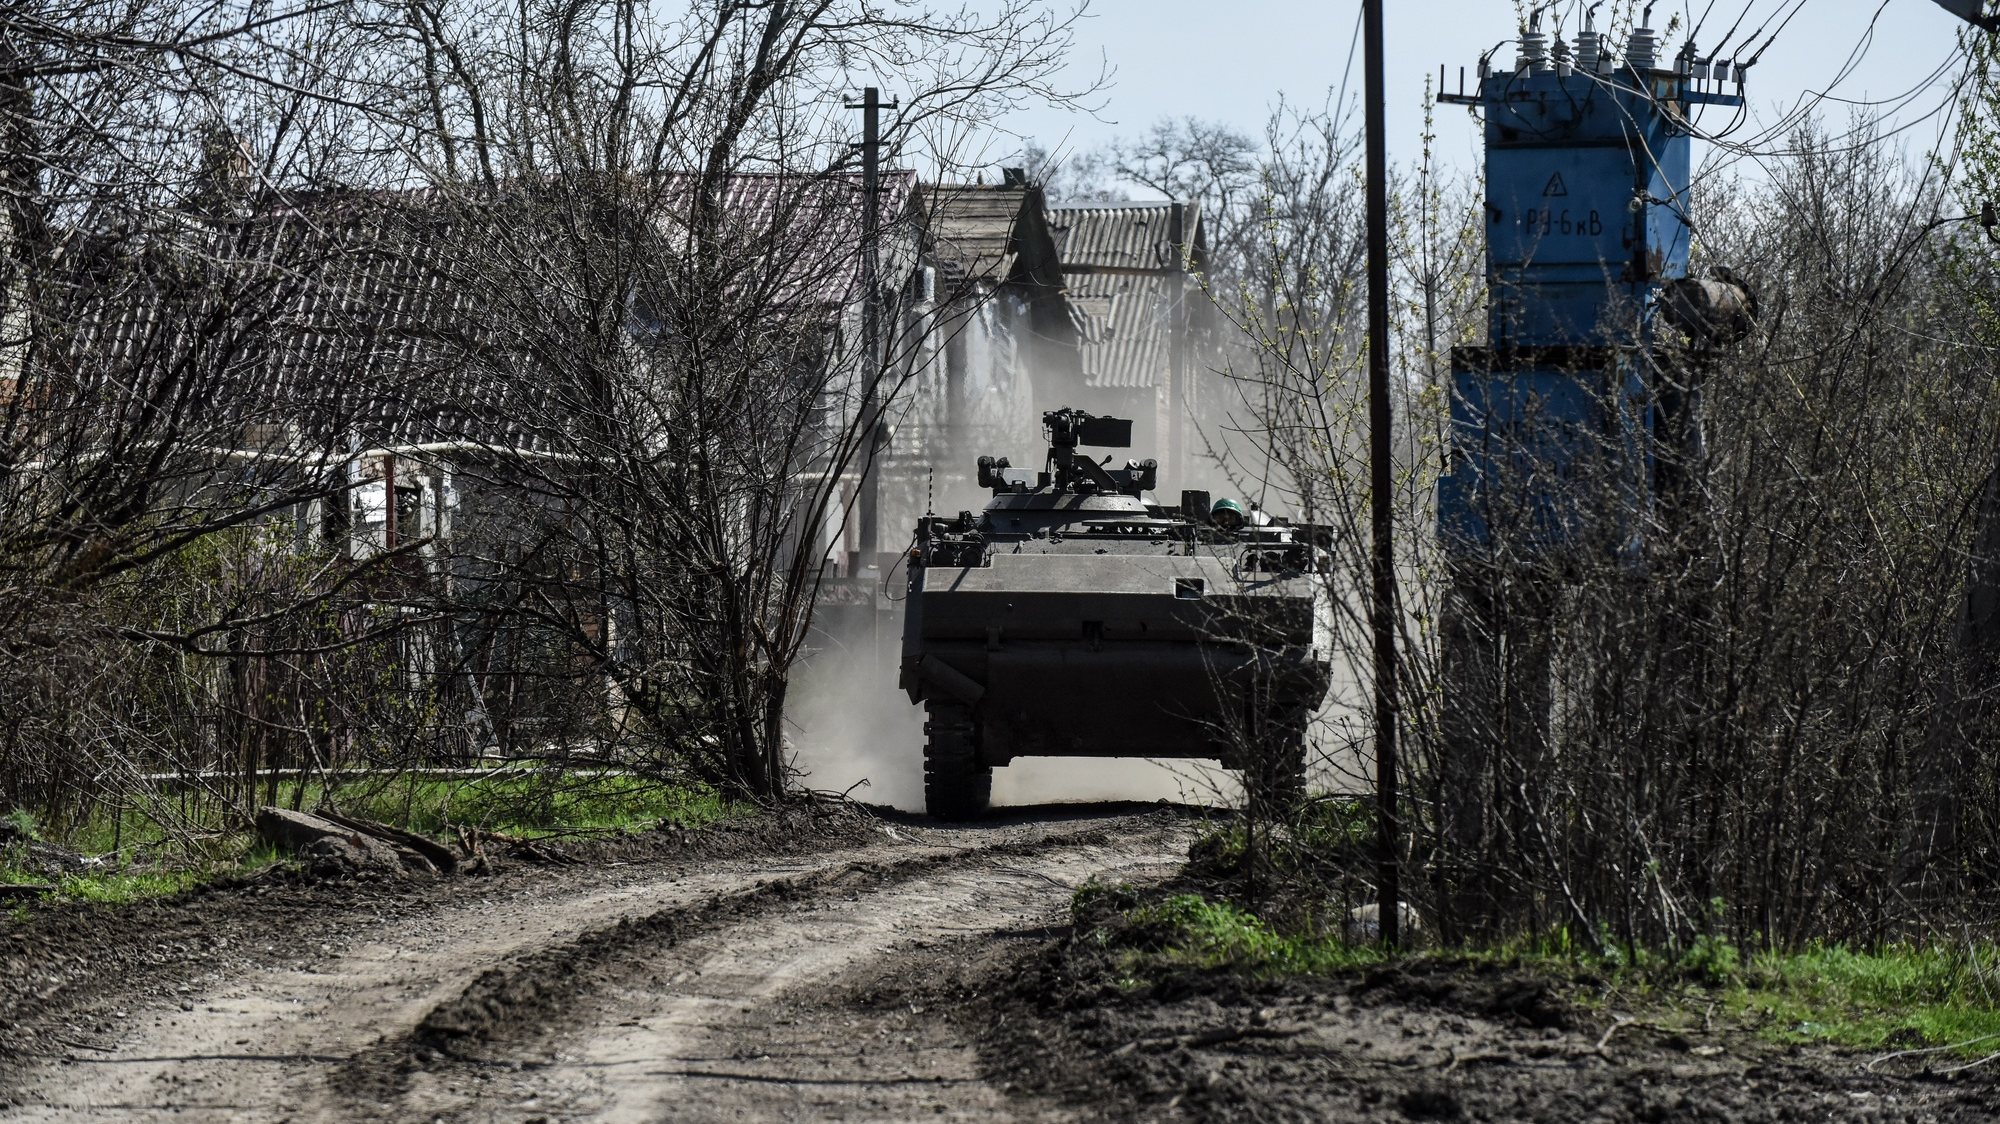 epa10567784 A Ukrainian forces&#039; M113 APC drives at an undisclosed location near Bakhmut, Donetsk region, Ukraine, 10 April 2023. Russian troops entered Ukrainian territory on 24 February 2022, starting a conflict that has provoked destruction and a humanitarian crisis.  EPA/OLEG PETRASYUK